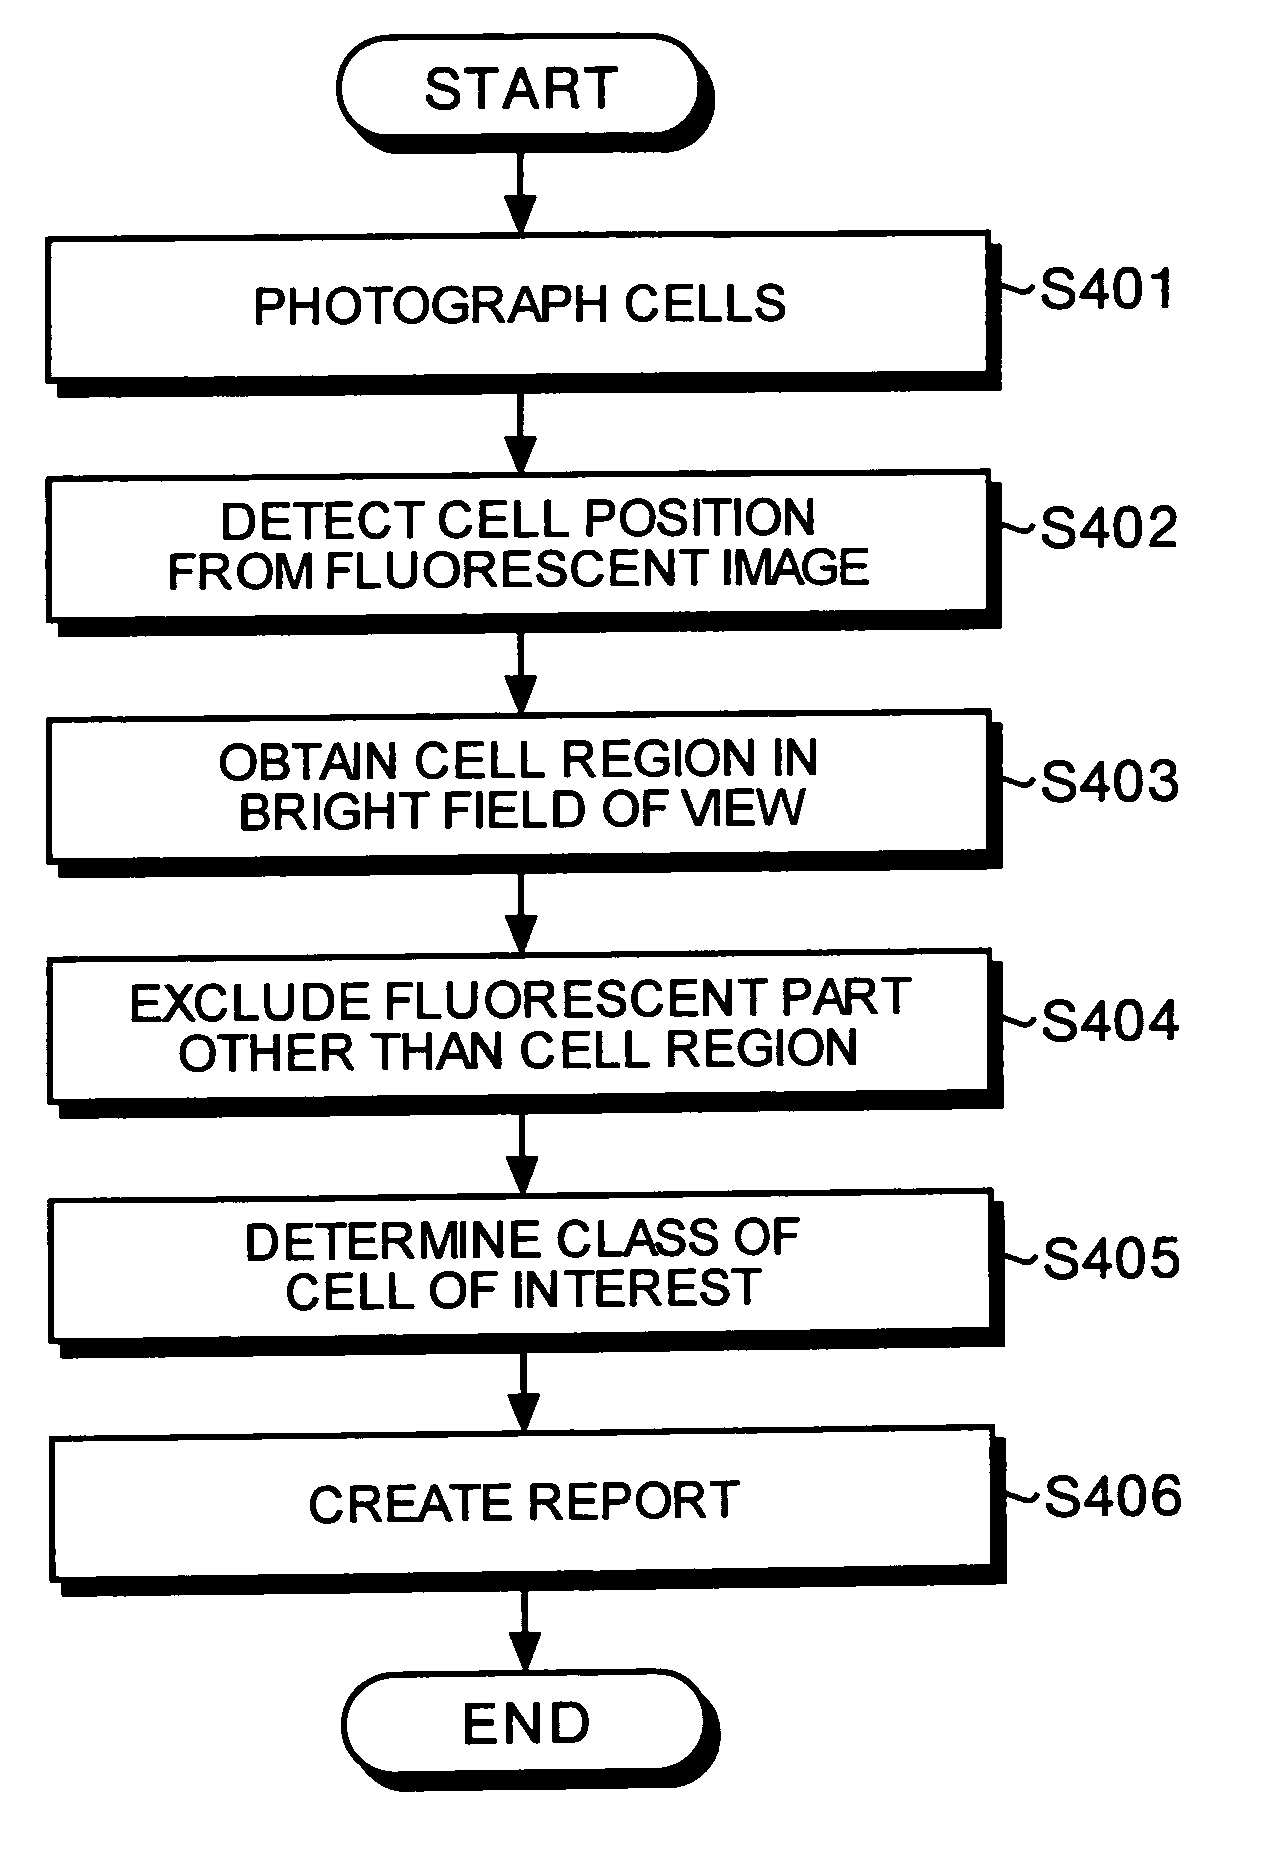 Method for supporting cell image analysis